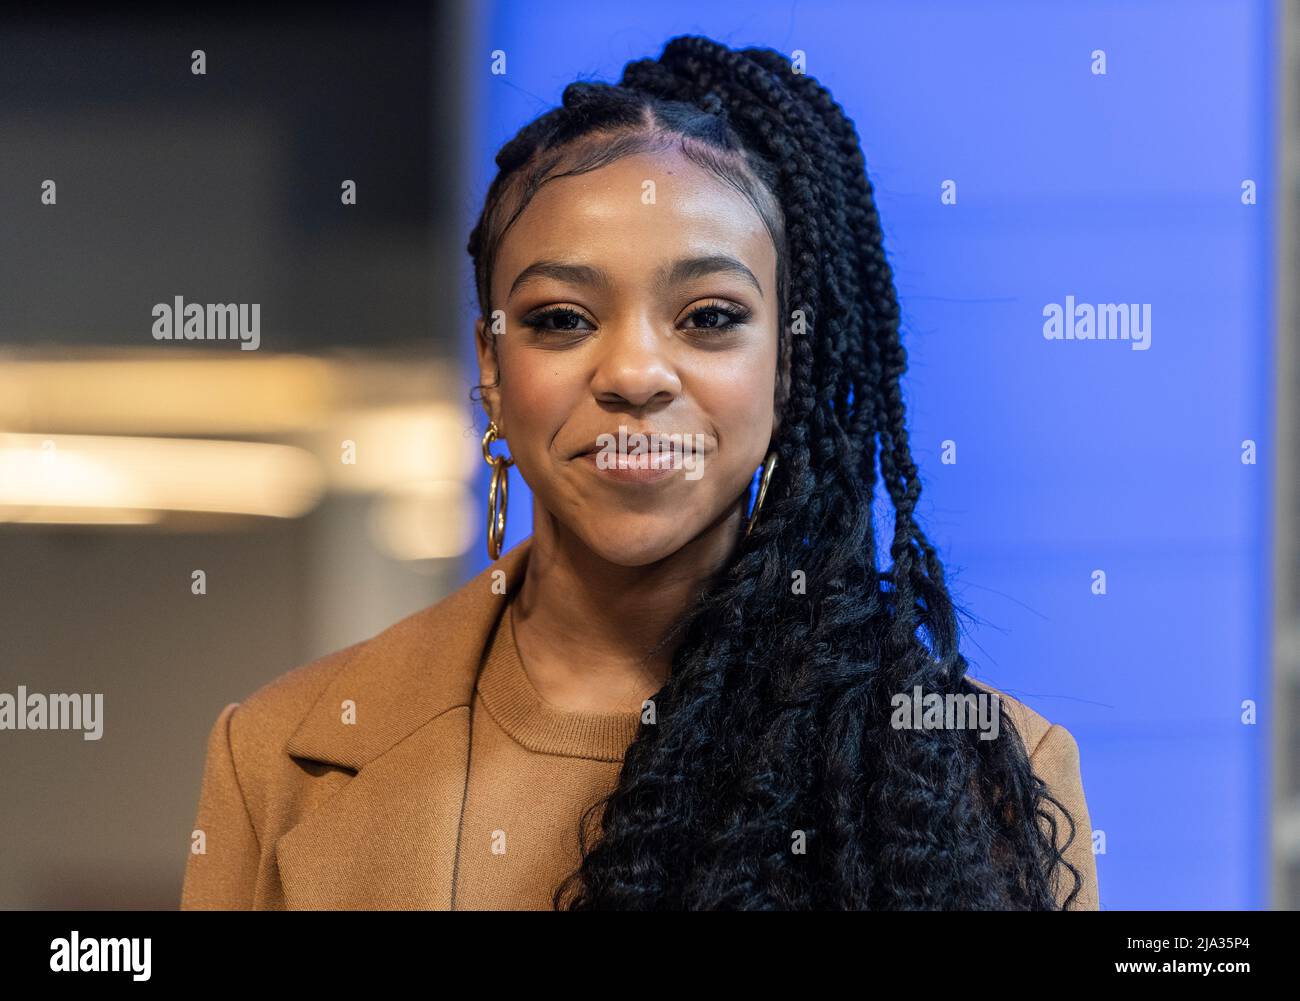 New York, NY - May 26, 2022: Priah Ferguson from Stranger Things attends ceremonial lighting of Empire State Building ahead of global event for season 4 premiere Stock Photo